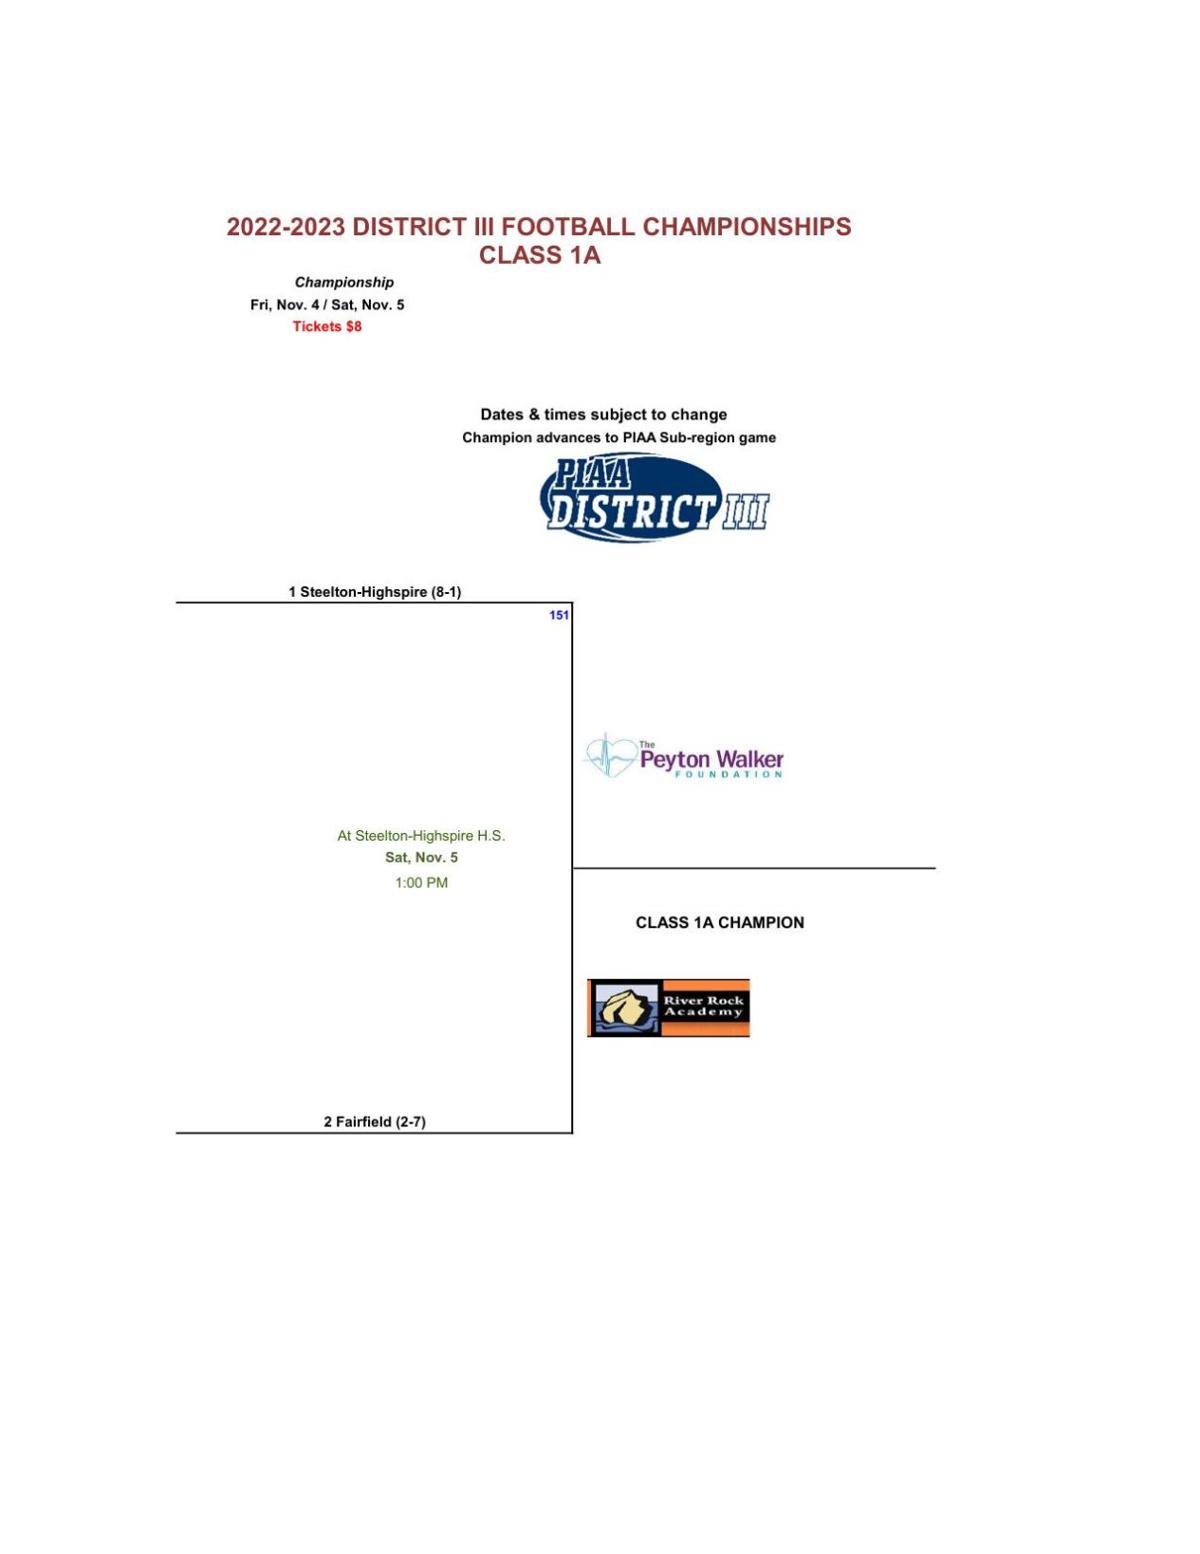 District III Football playoff schedule changes